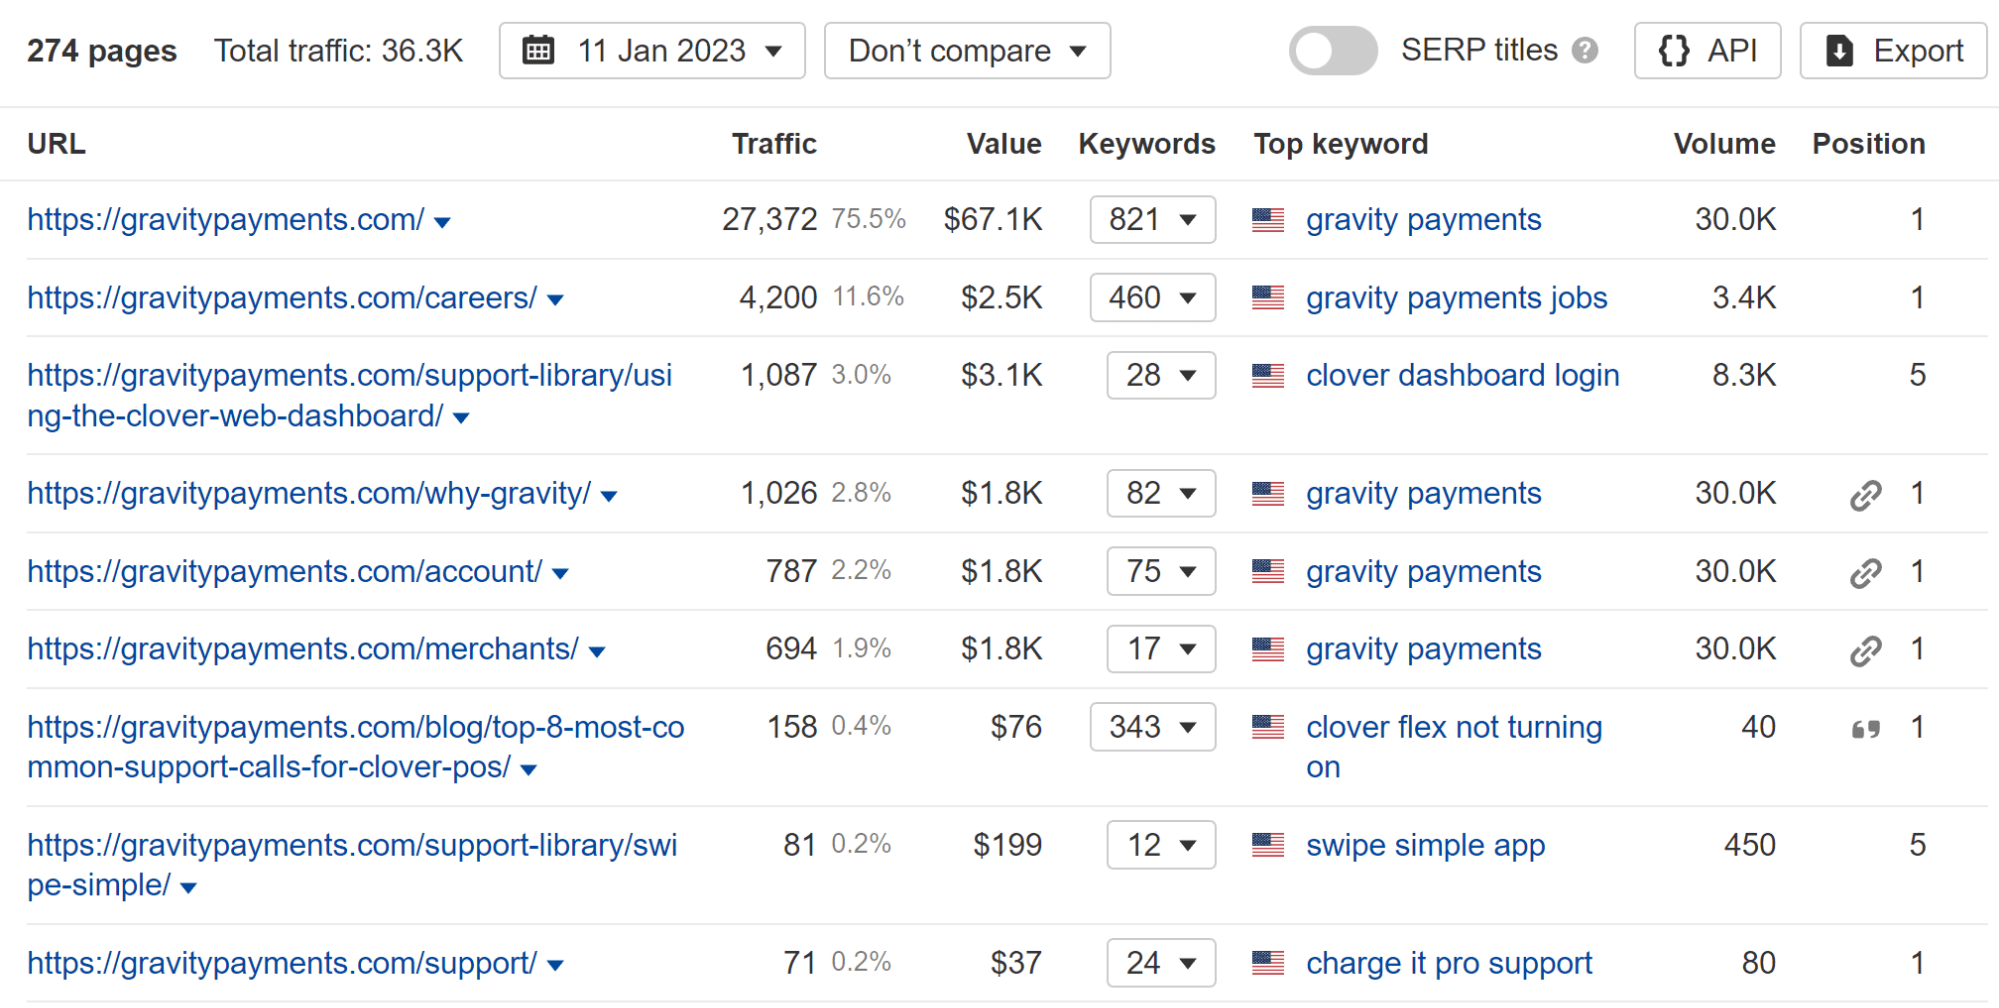 Top pages report showing most of the traffic for gravitypayments.com is branded